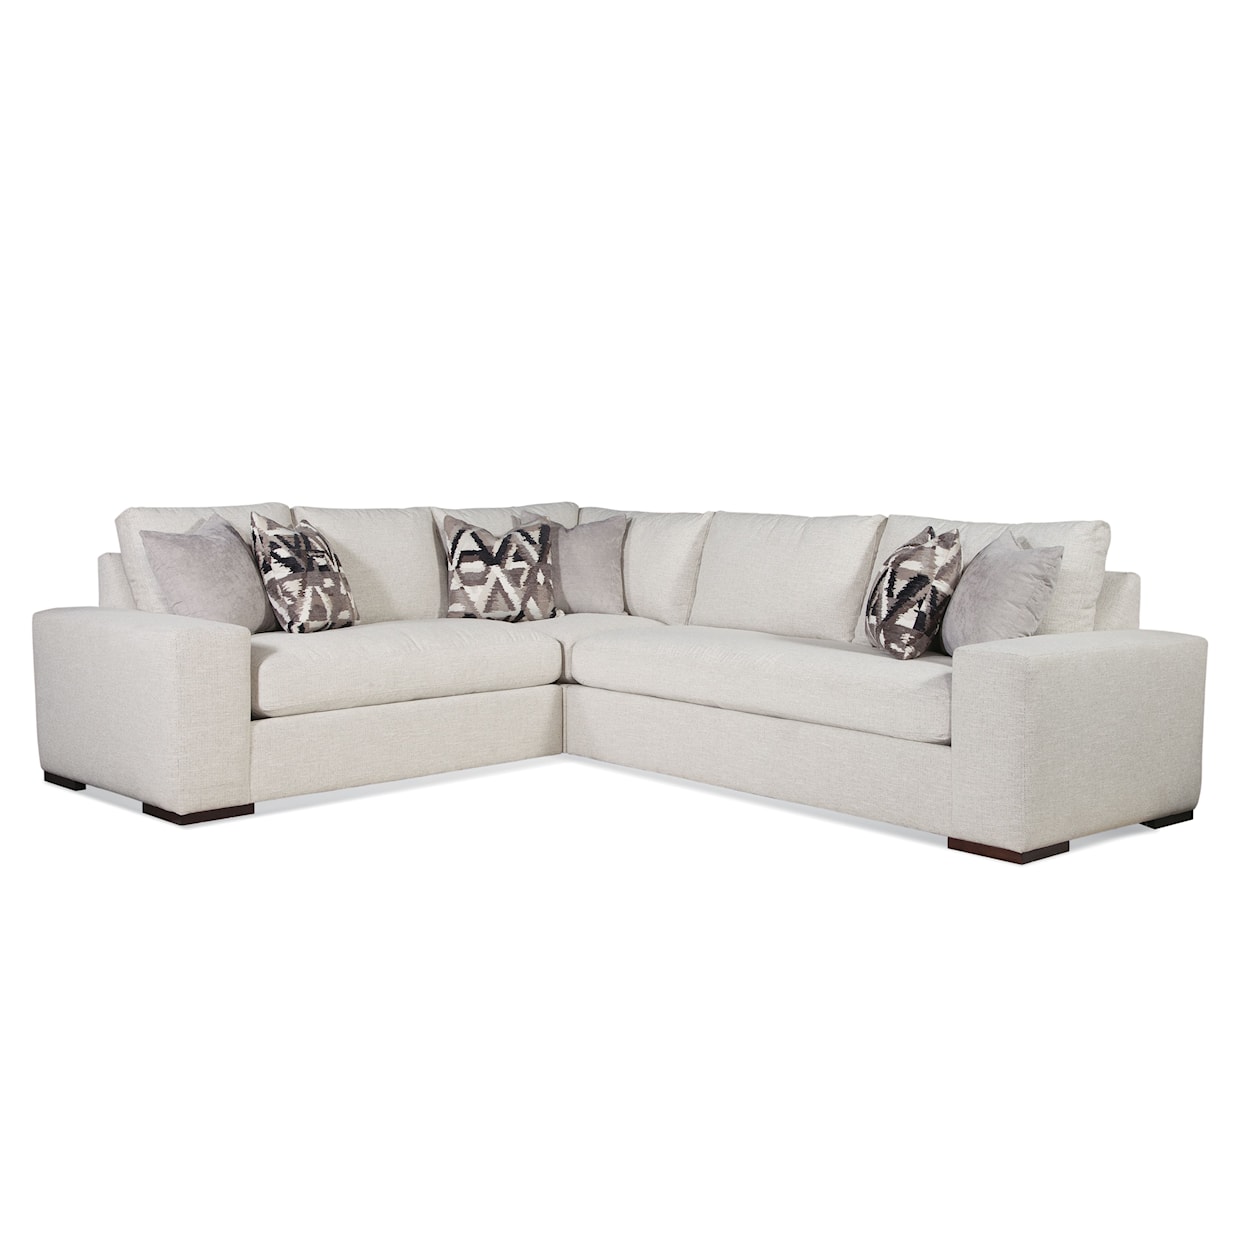 Braxton Culler Memphis Three Piece Bench Seat L Sectional